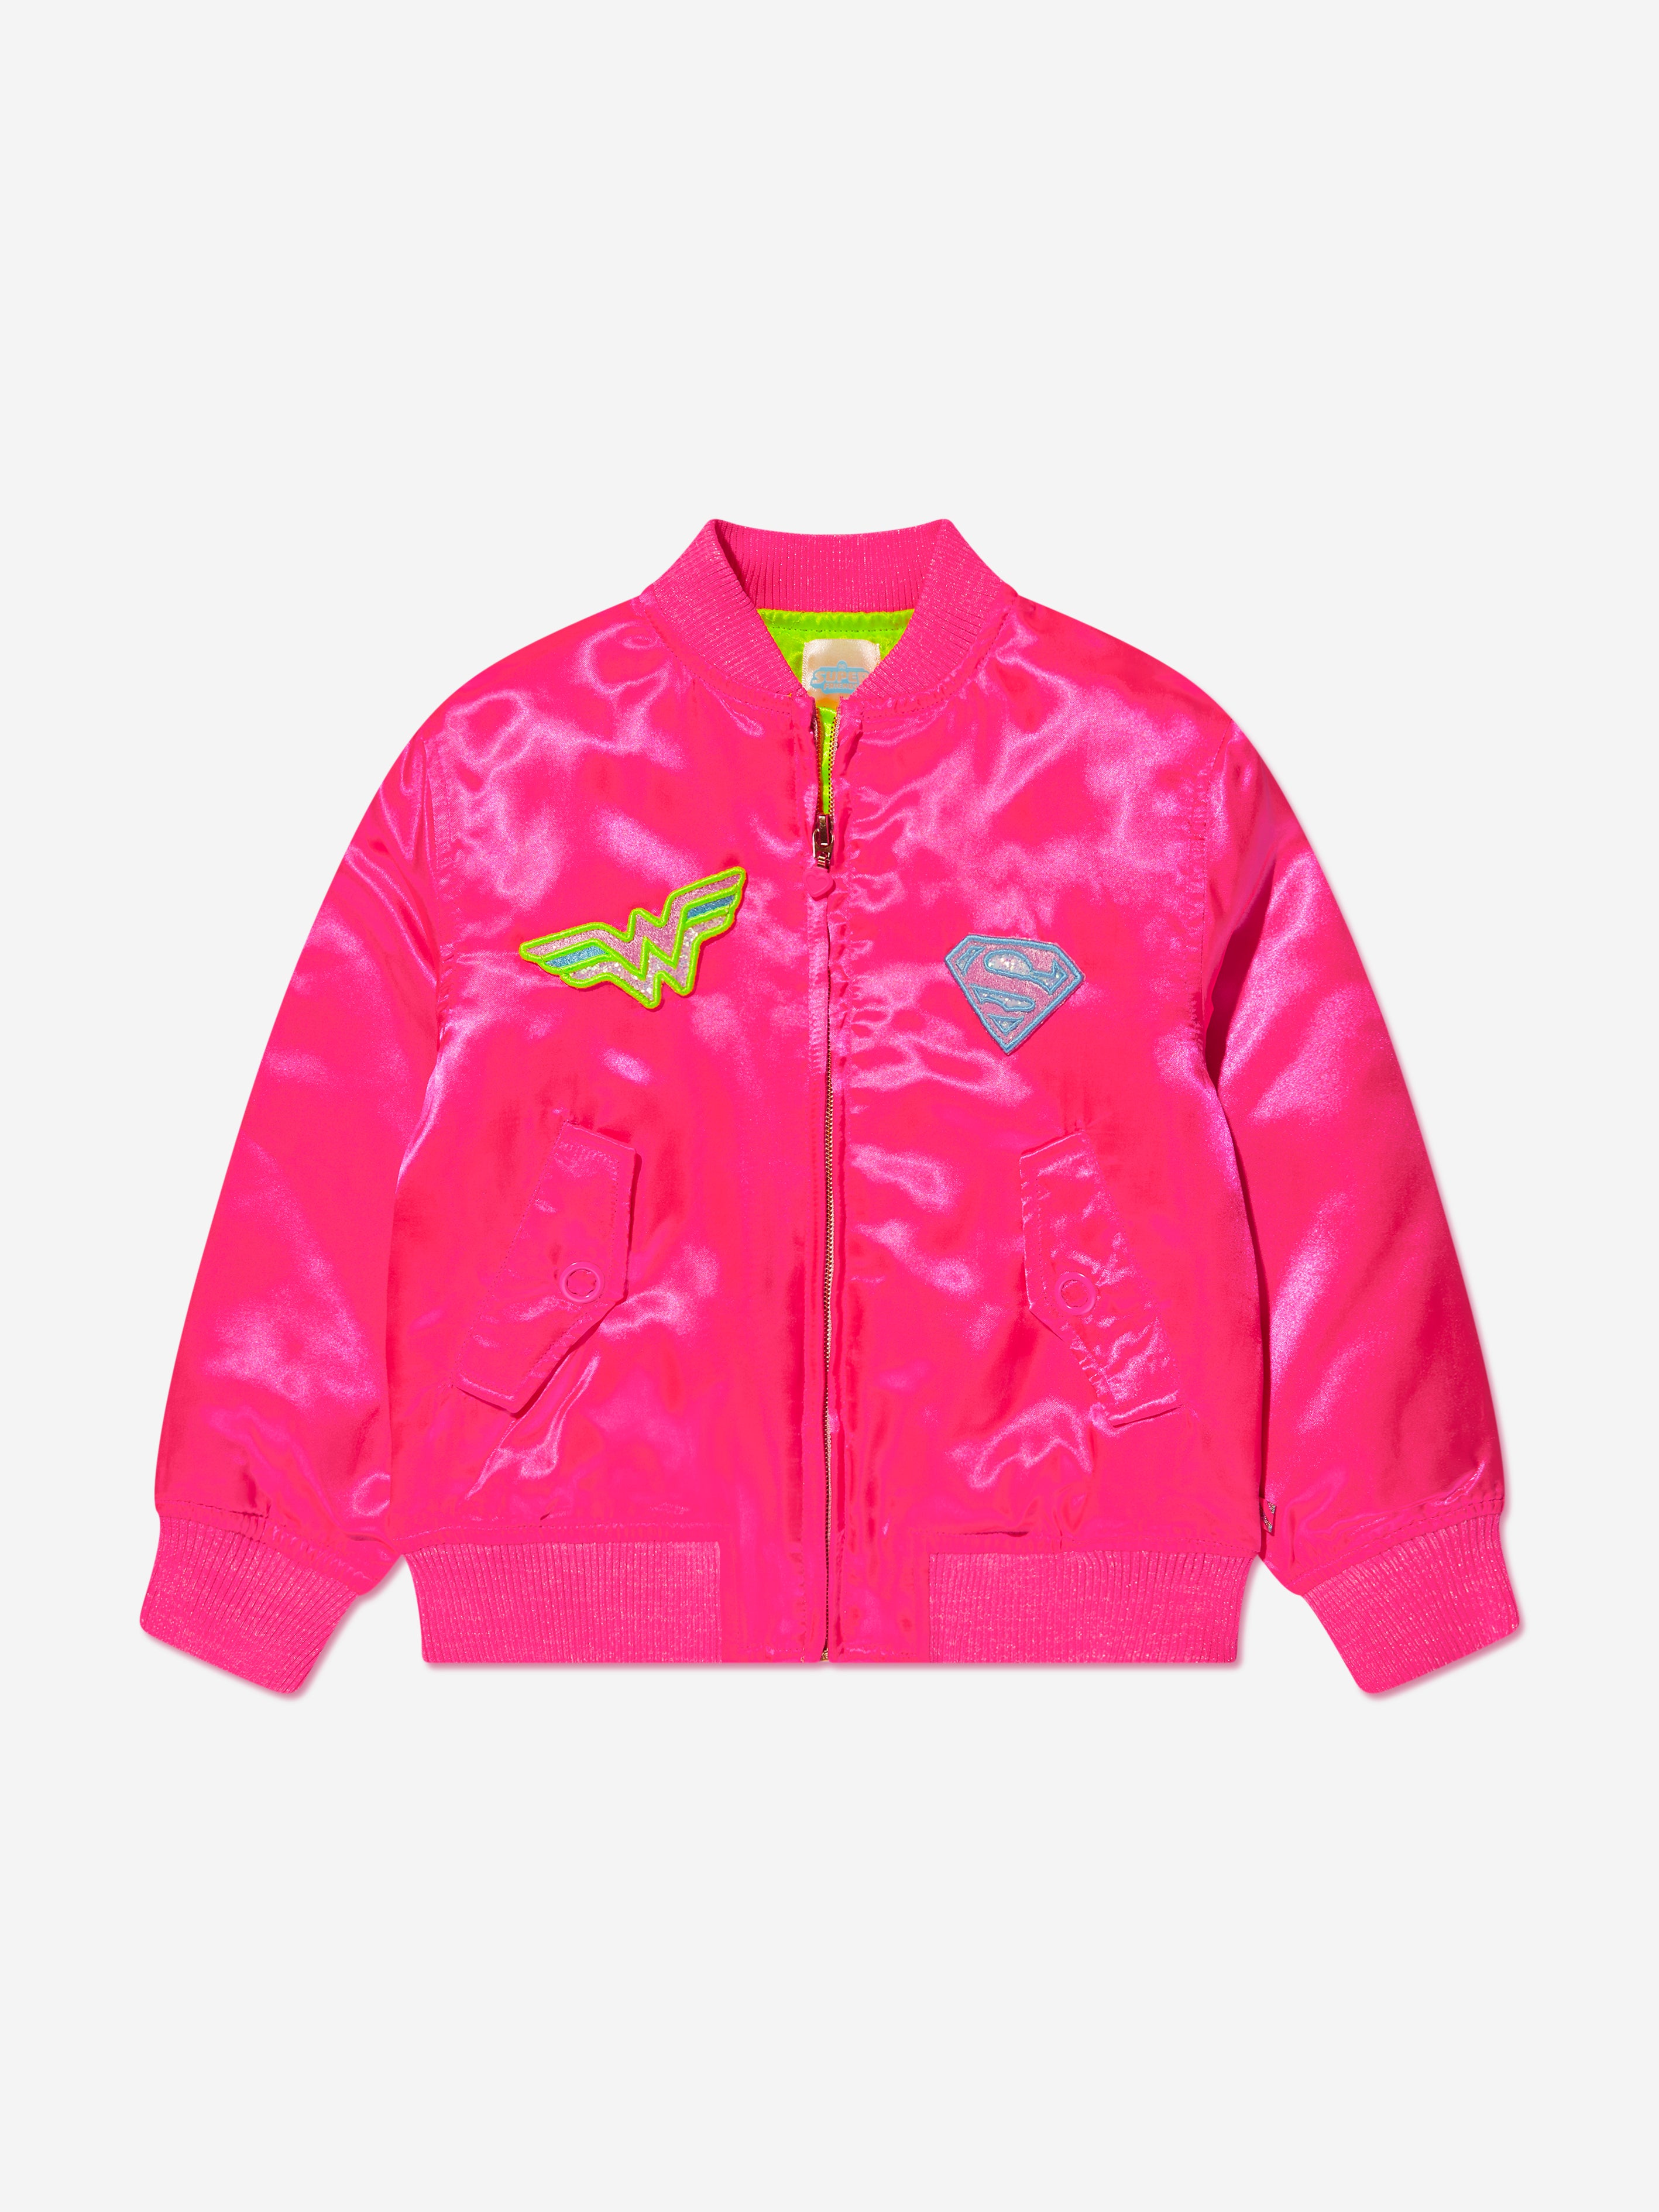 Adding to our Pretty Roses collection - a new Bomber jacket, and